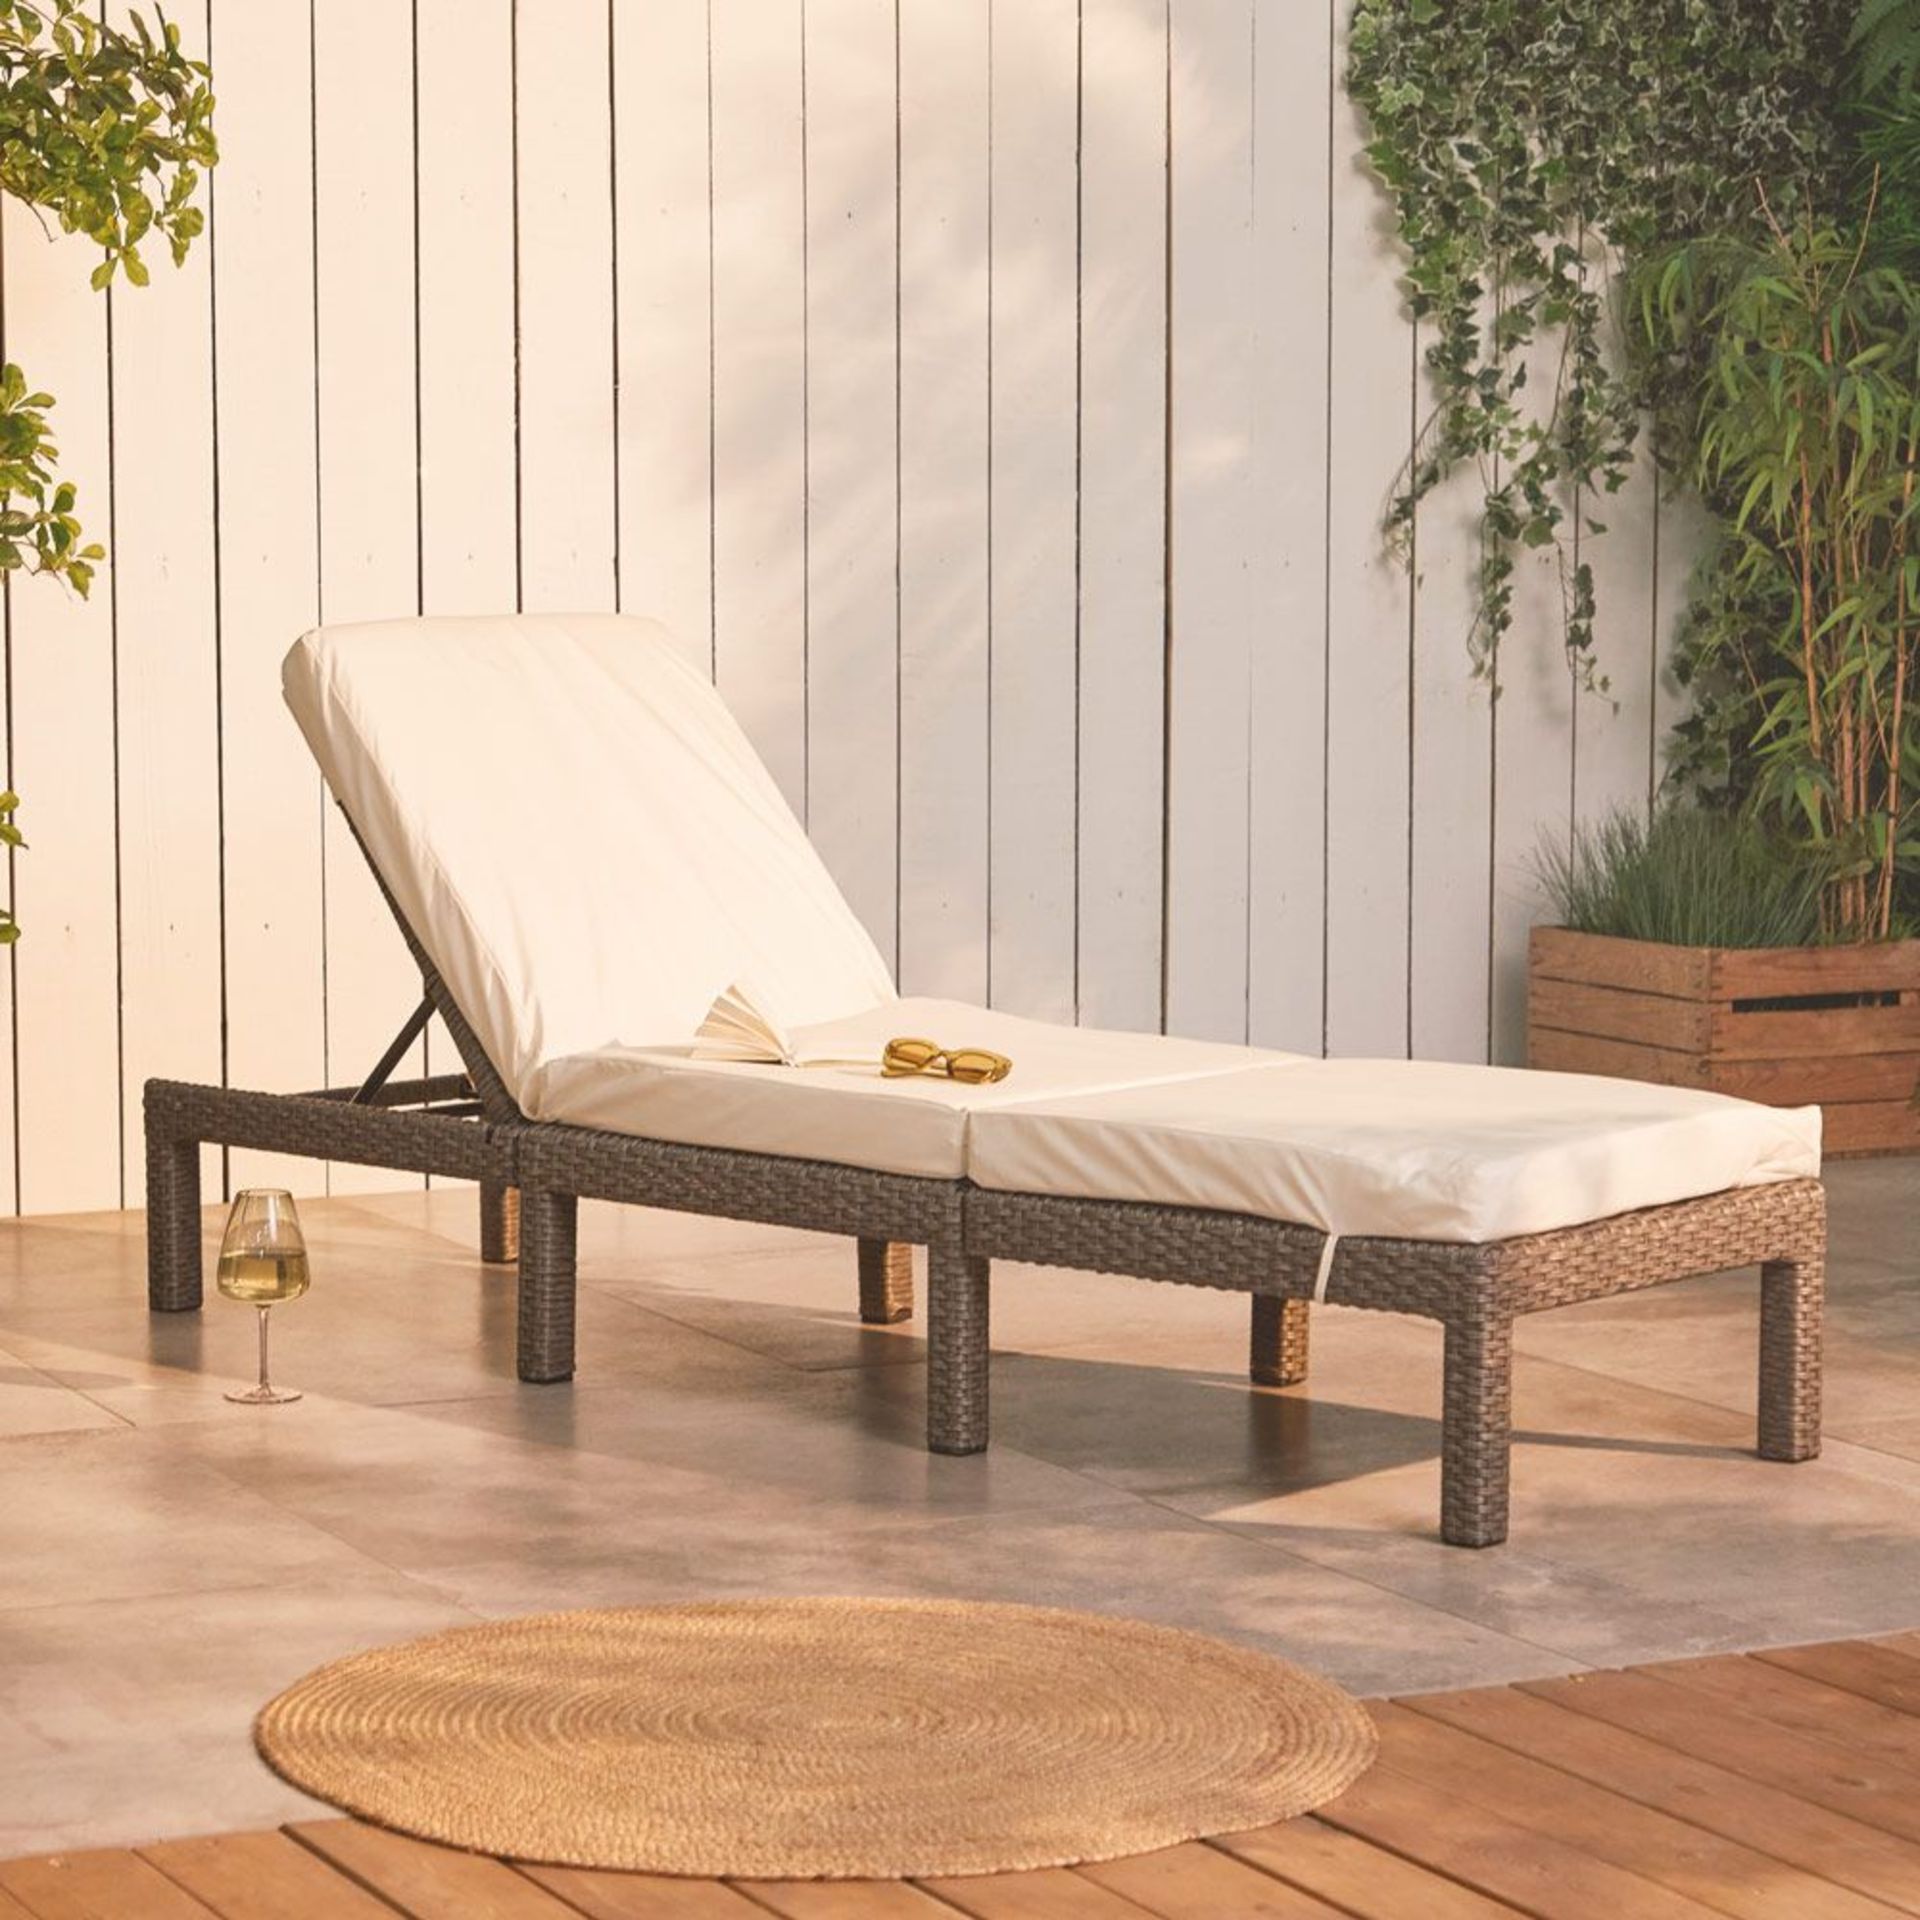 Rattan Sun Lounger with Cushion. (REF522) Relax in style... Whether you want to sunbathe, read a - Image 2 of 3